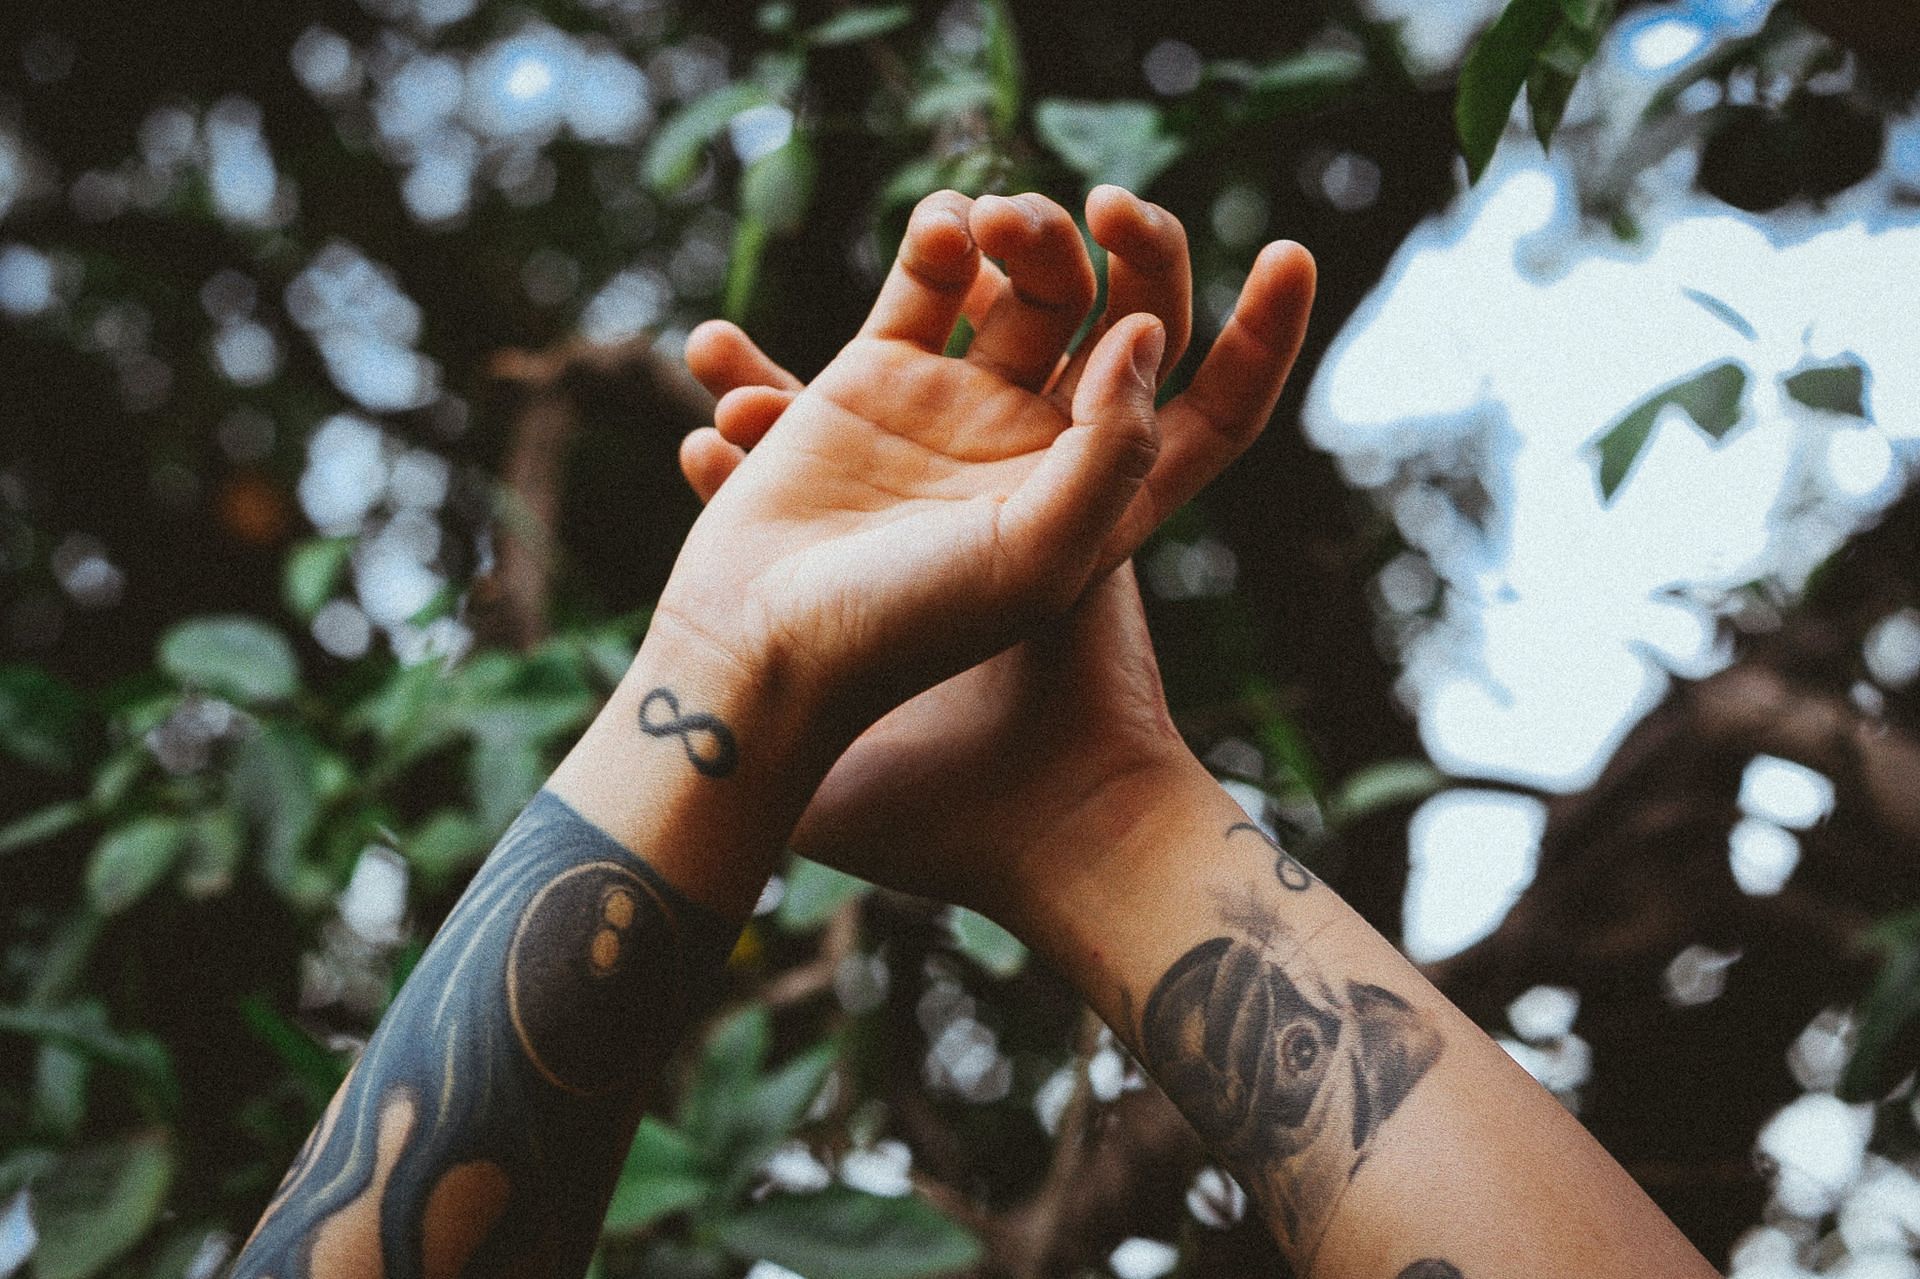 Infinity in itself carries a lot of weight and meaning. When combined with mental health, it becomes a very powerful tattoo. (Image via Unsplash/Matheus Ferrero)